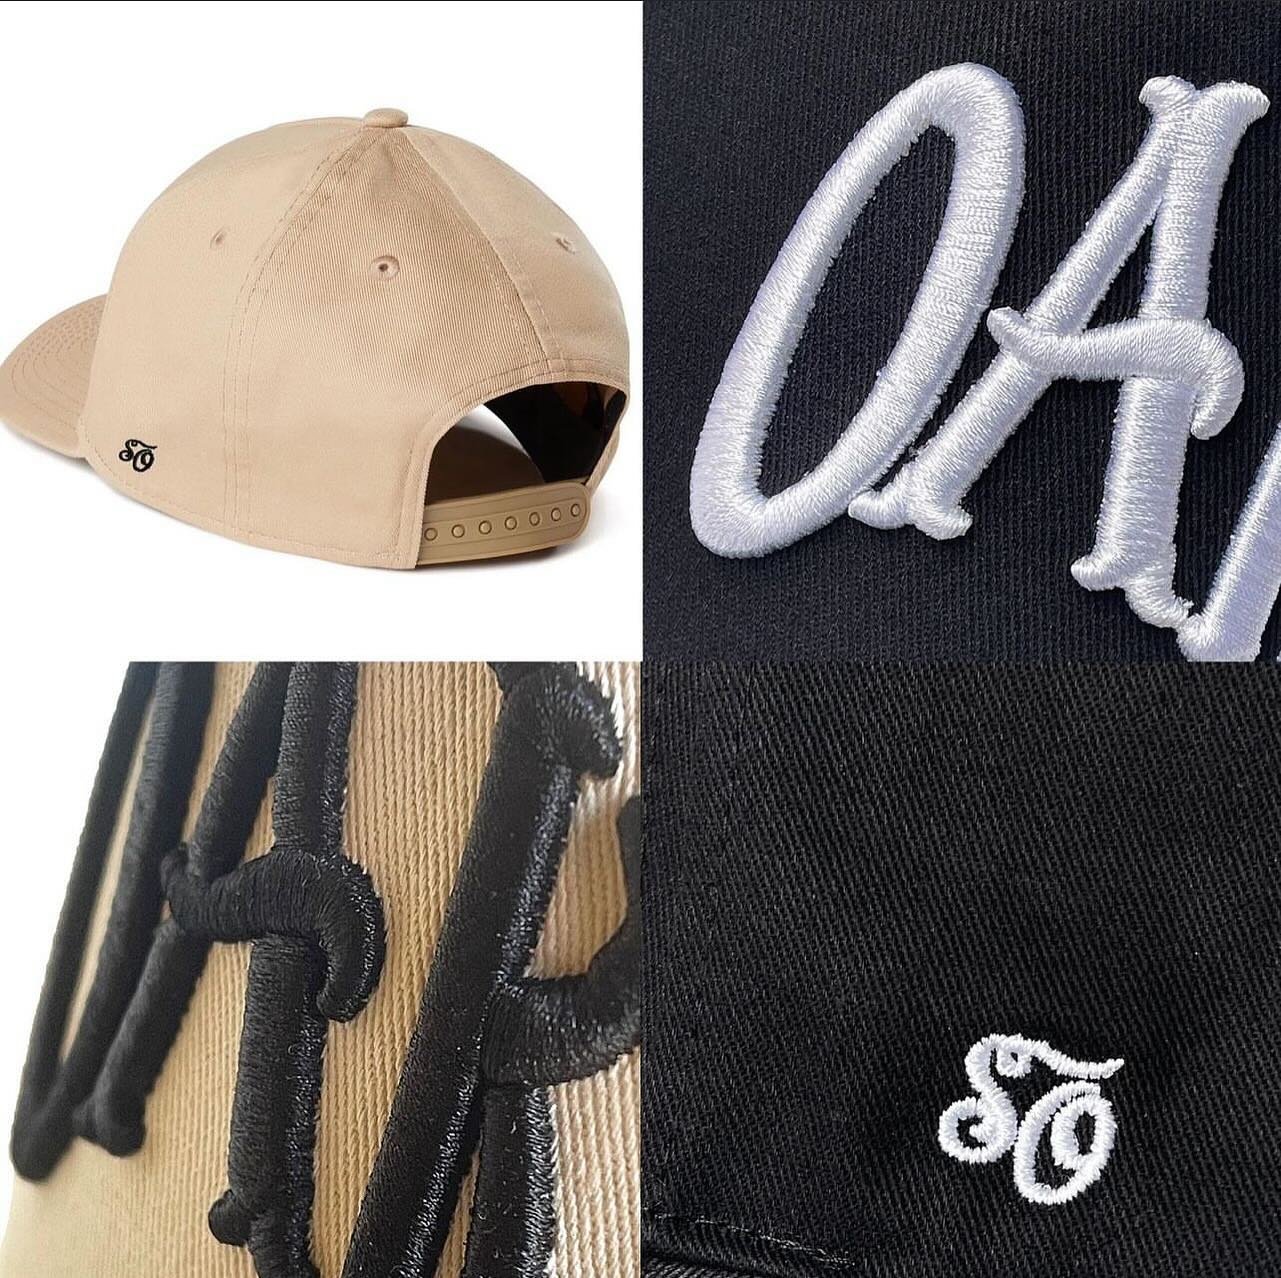 |
50% off our 3D embroidery A-Frame caps with discount code HATS50